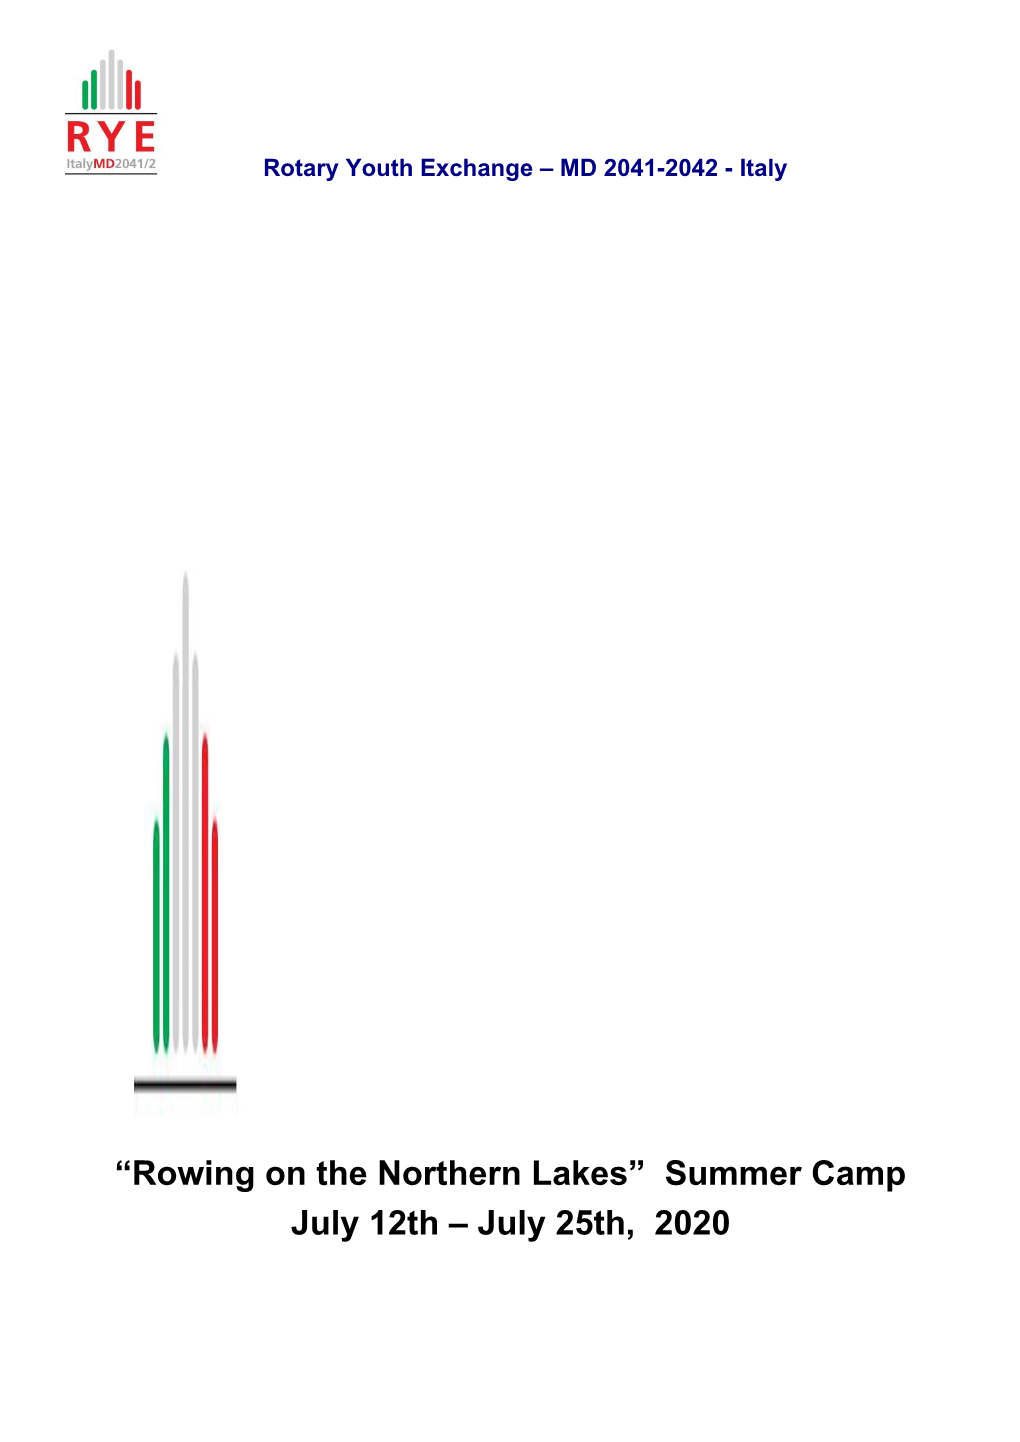 “Rowing on the Northern Lakes” Summer Camp